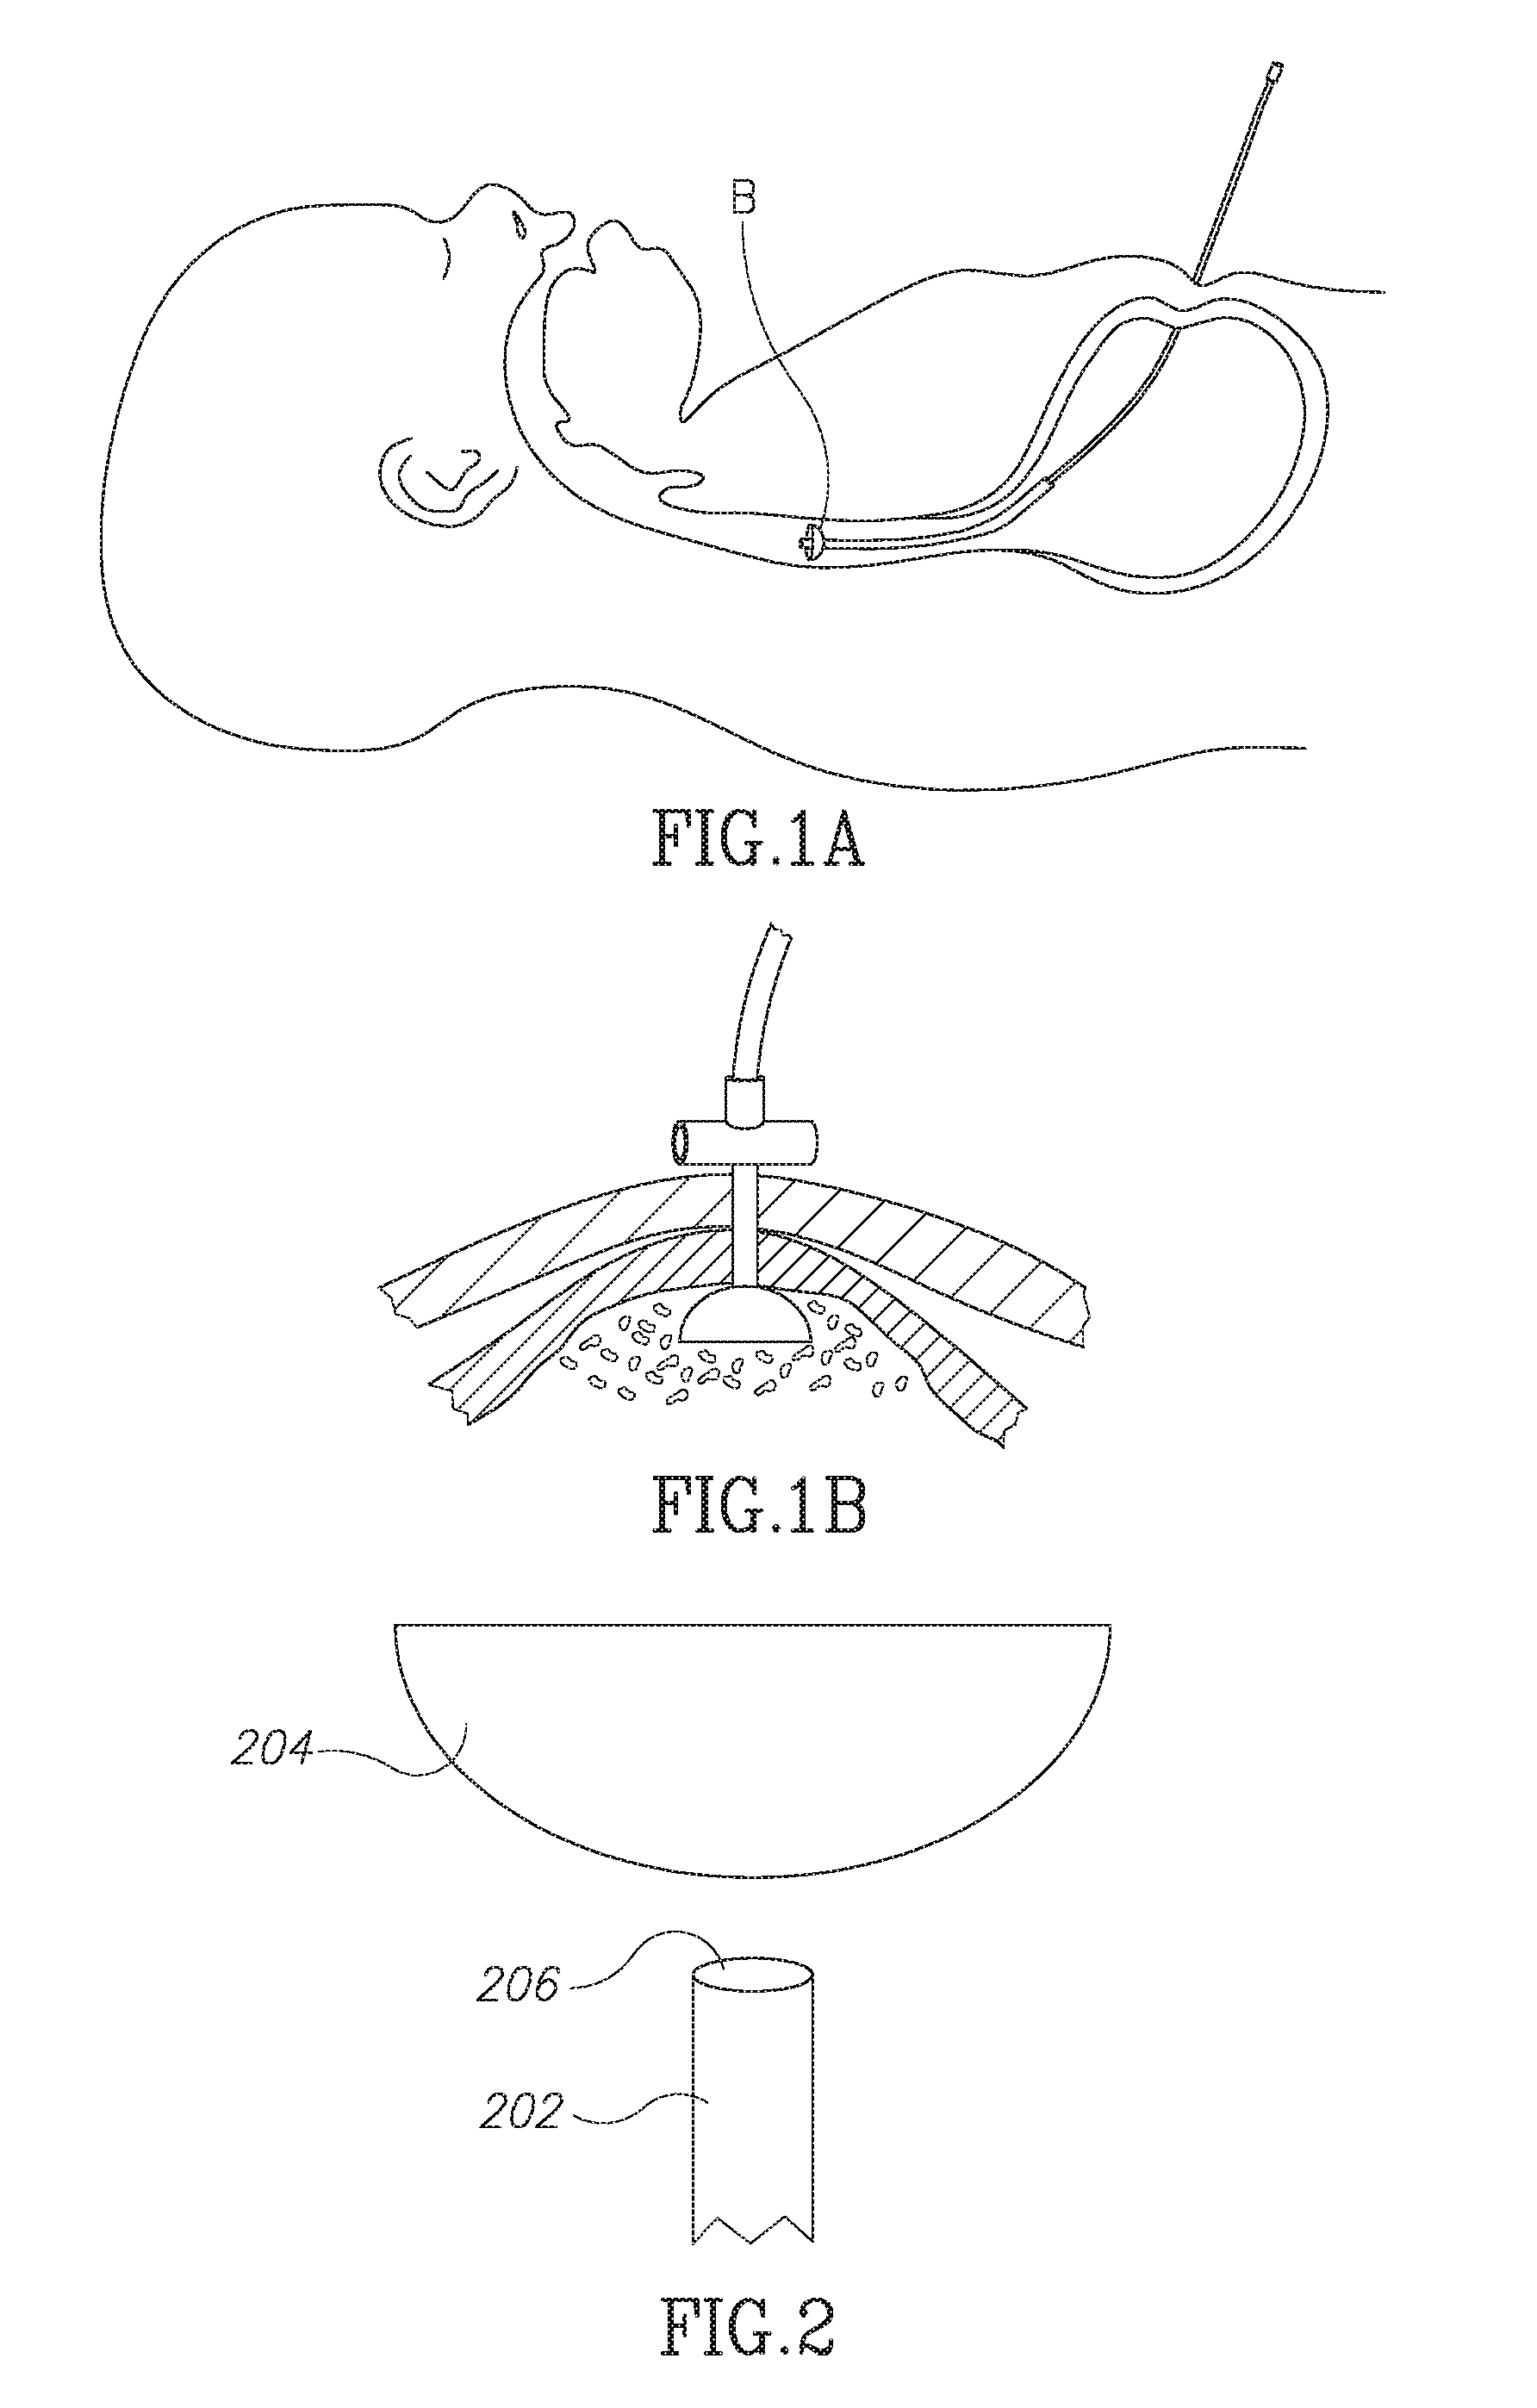 Devices and methods for percutaneous endoscopic gastrostomy and other ostomy procedures